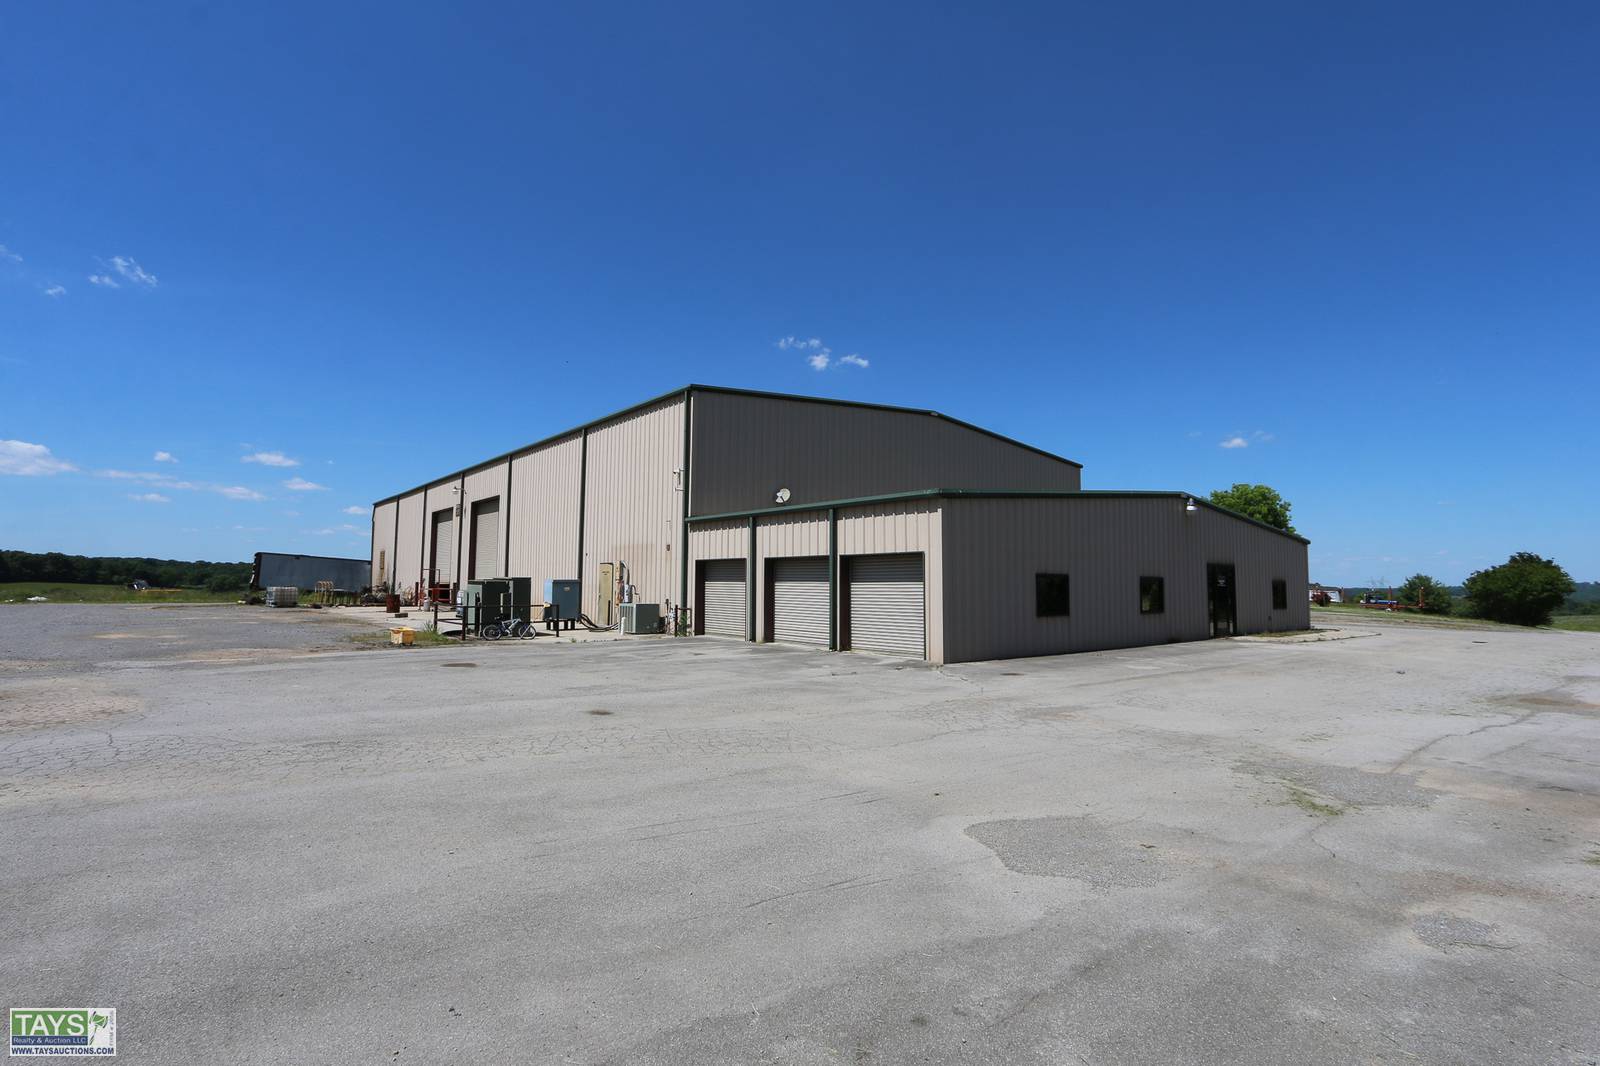 ONLINE FORECLOSURE AUCTION:12,740 Sq.Ft. COMMERCIAL BUILDING & 2 HOMES on 13.84 Ac±